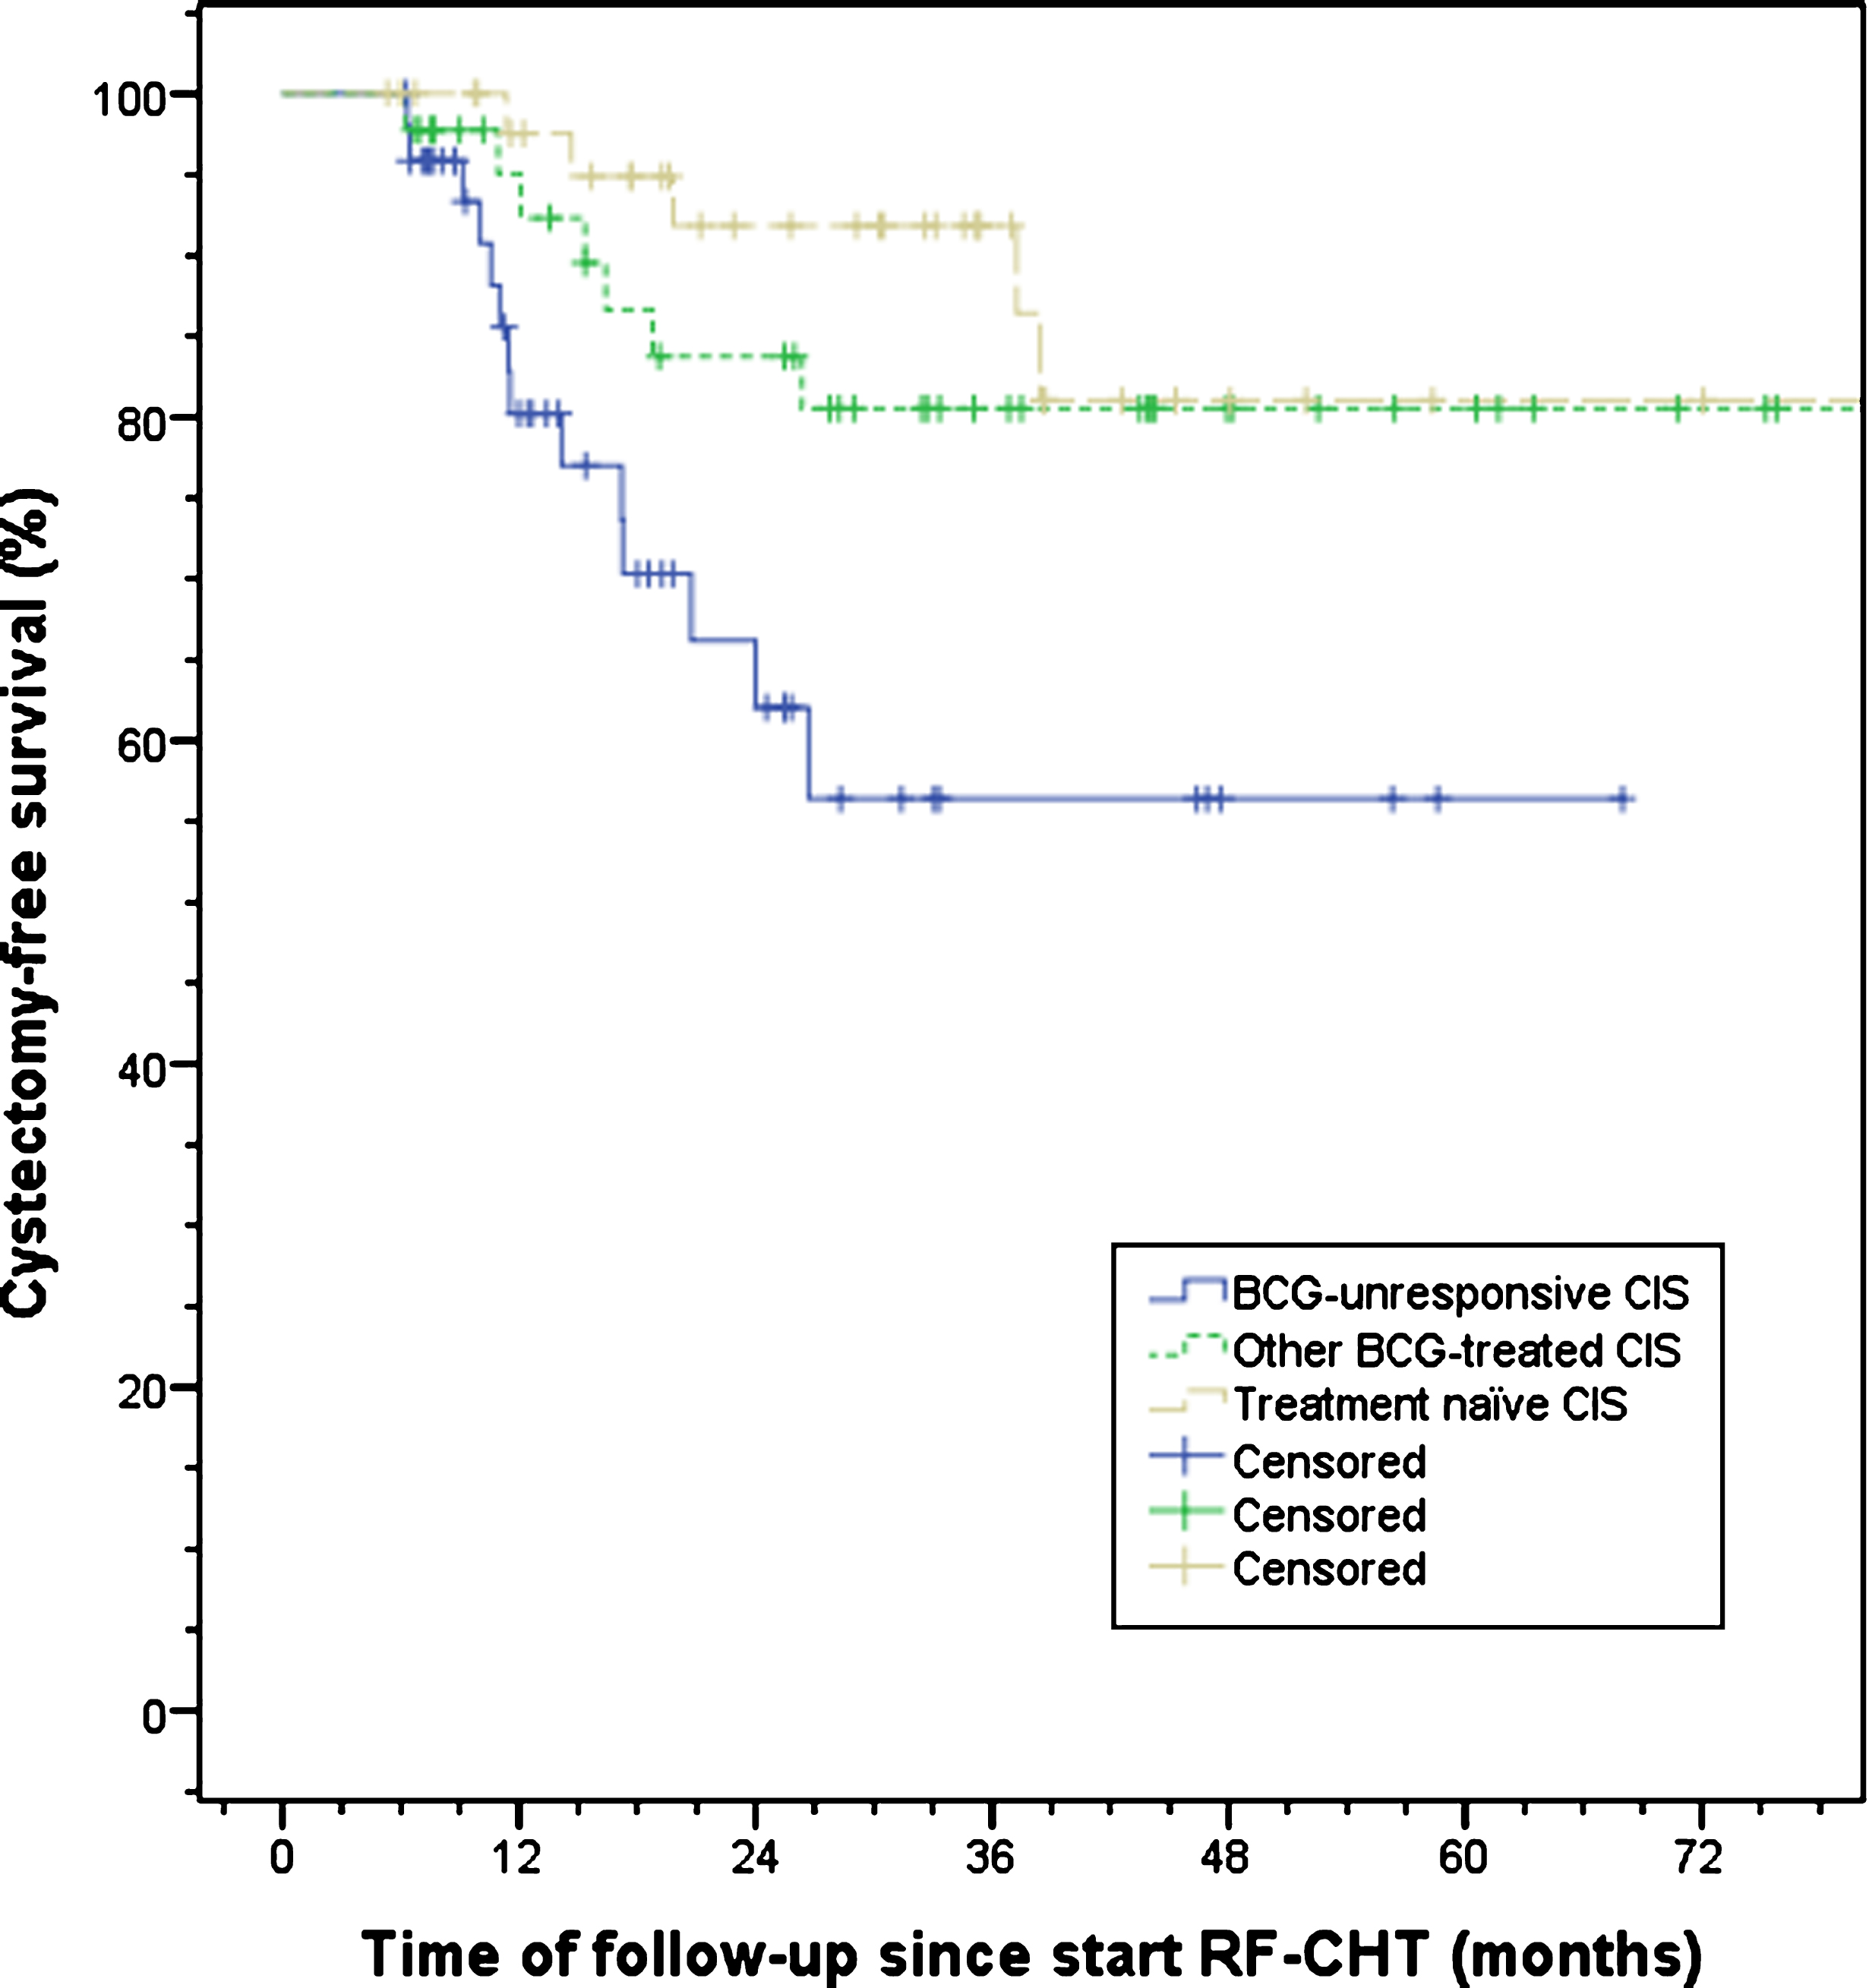 Cystectomy-free survival split by treatment history. A significant difference between BCG-unresponsive, other BCG-treated, and treatment naïve CIS patients was observed, p = 0.006. BCG, bacillus Calmette-Guérin; CIS, carcinoma in situ; RF-CHT, radiofrequency-induced chemohyperthermia.